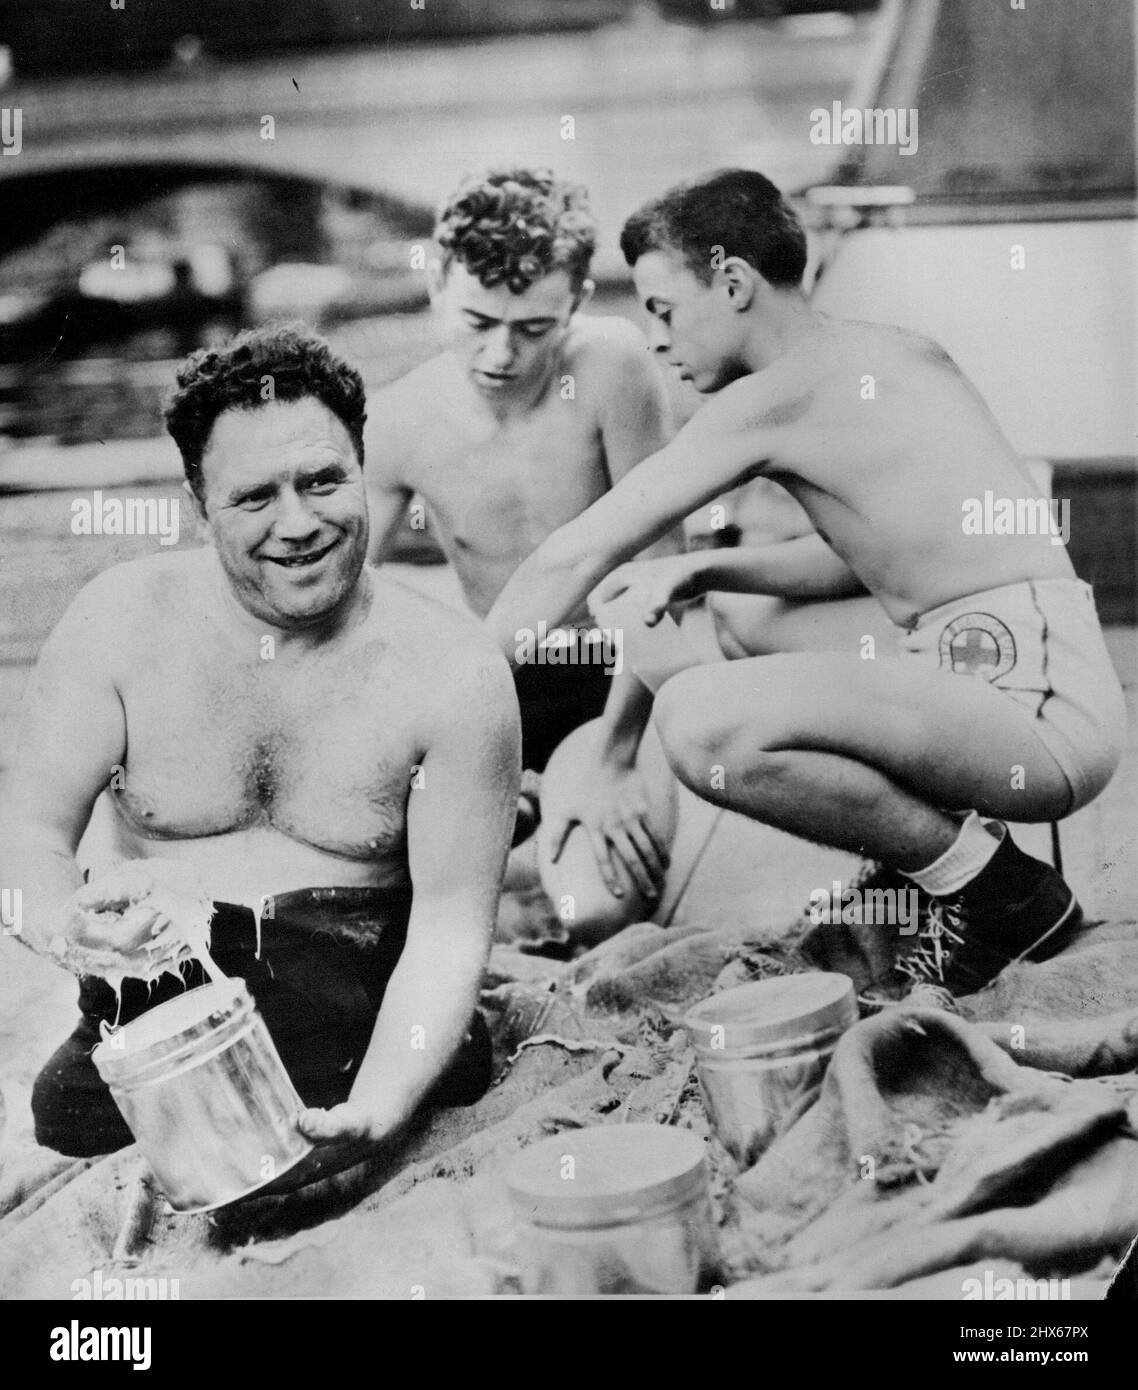 Legless Swimmer Prepares For Non-Stop -- Charles Zimmy, legless swimmer, is shown at Albany, N.Y., August 24, as he prepared to apply grease to his body for his attempt to swim non-stop from Albany to New York City down the Hudson River. Helping him, center and right, are Robert Sackrider and Roy Jones, members of the Albany Y.M.C.A. August 24, 1937. (Photo by Associated Press Photo). Stock Photo